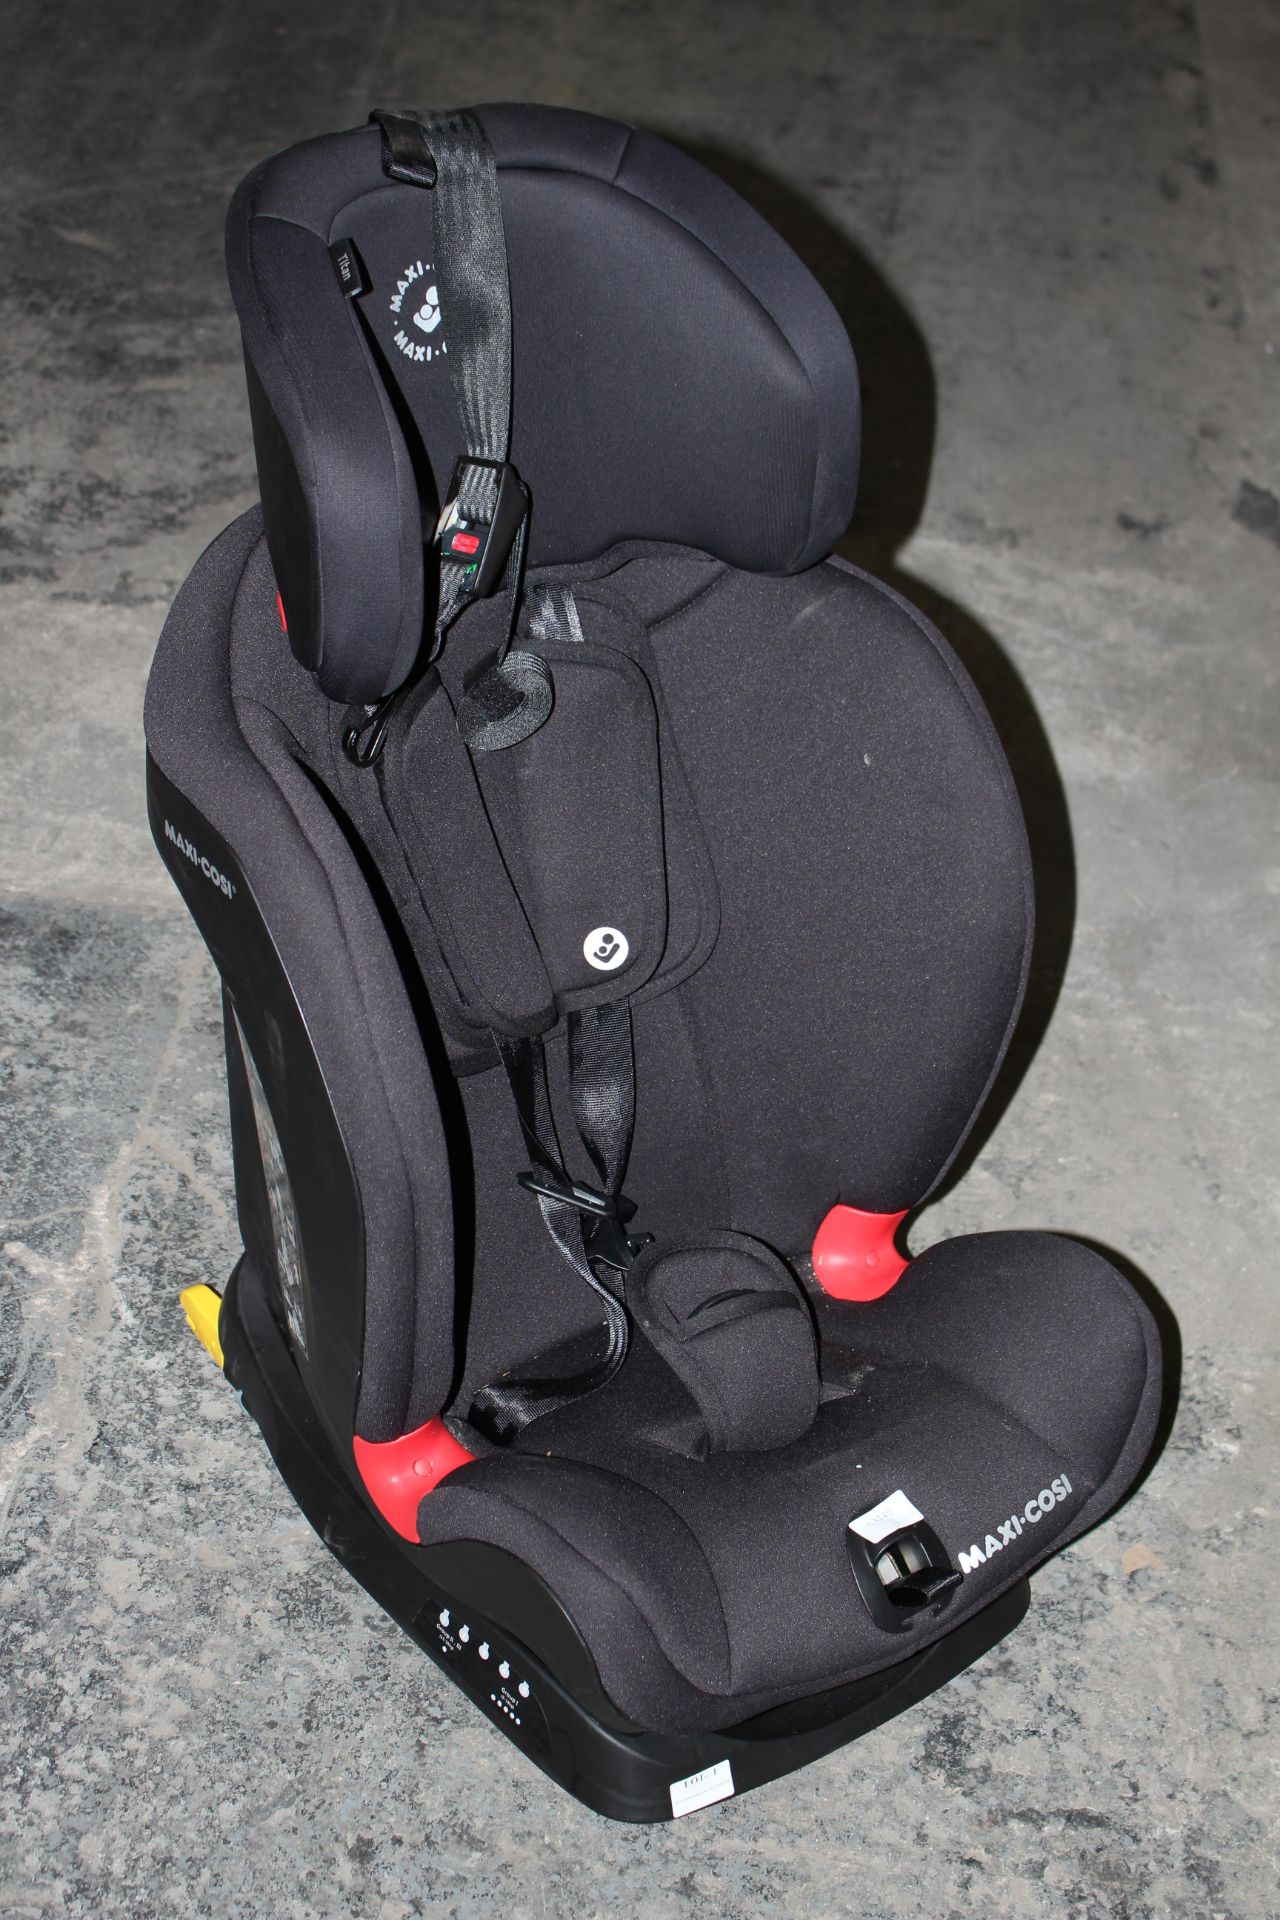 UNBOXED MAXI COSI TITAN CHILD CAR SAFETY SEAT RRP £198.00Condition ReportAppraisal Available on